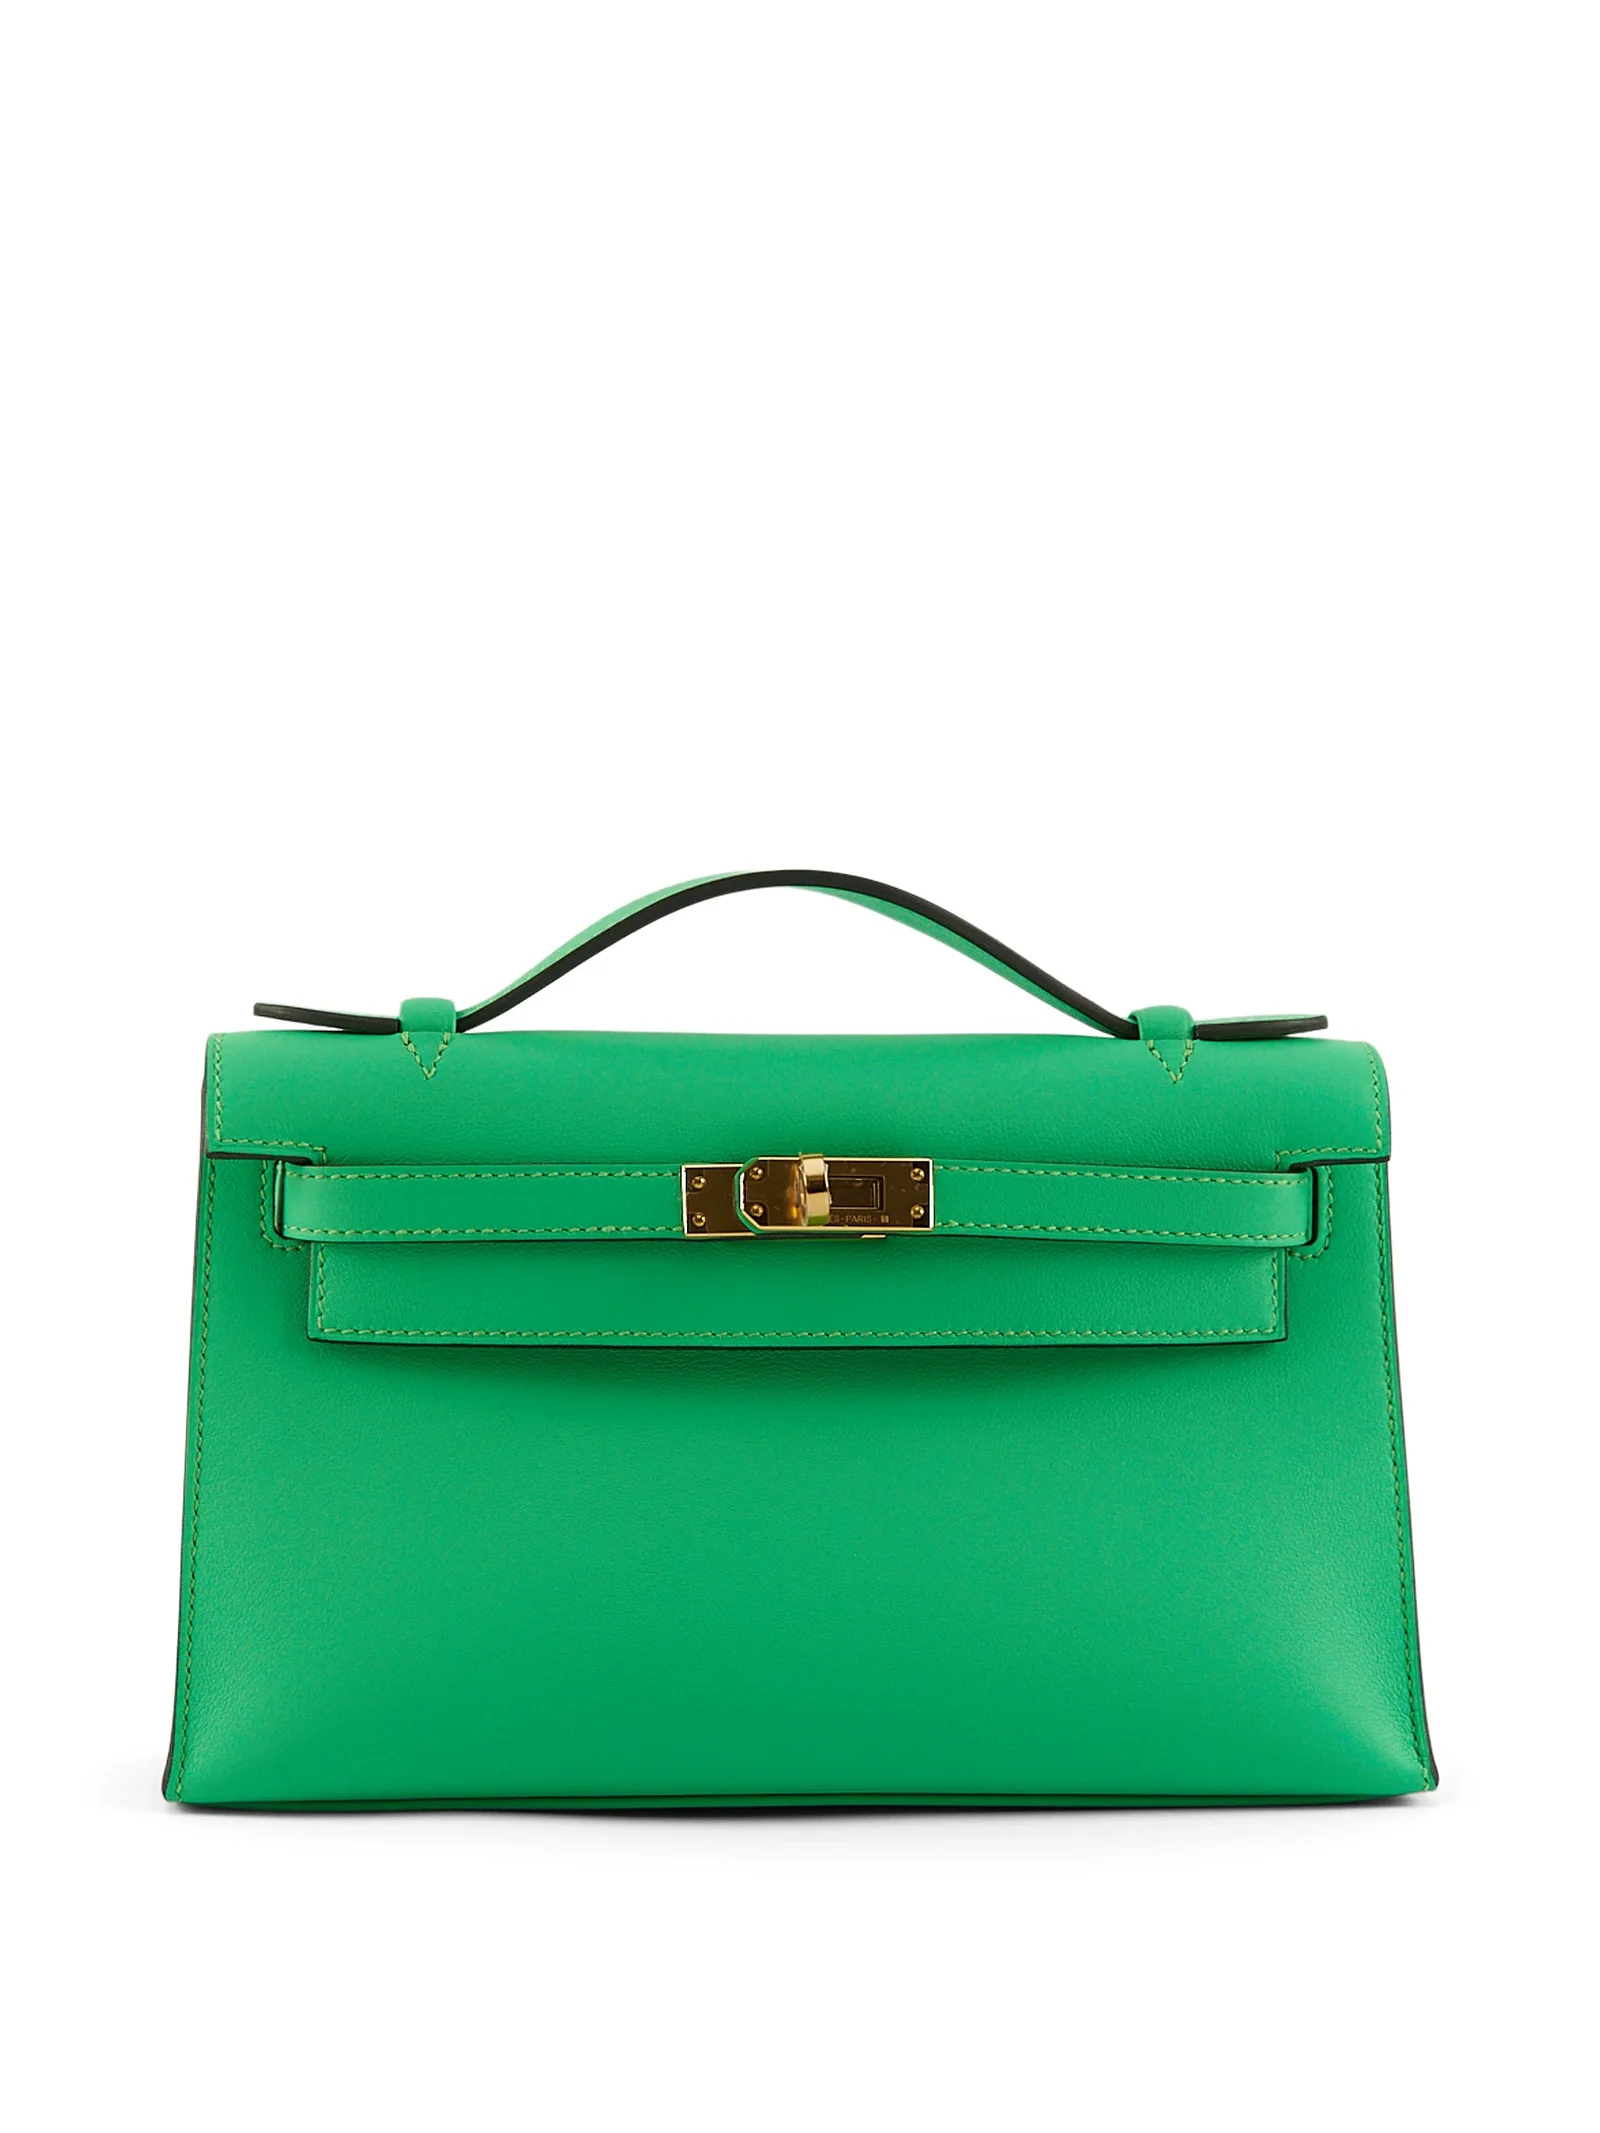 Image of HERMÈS KELLY POCHETTE VERT COMICS Swift Leather with Gold Hardware